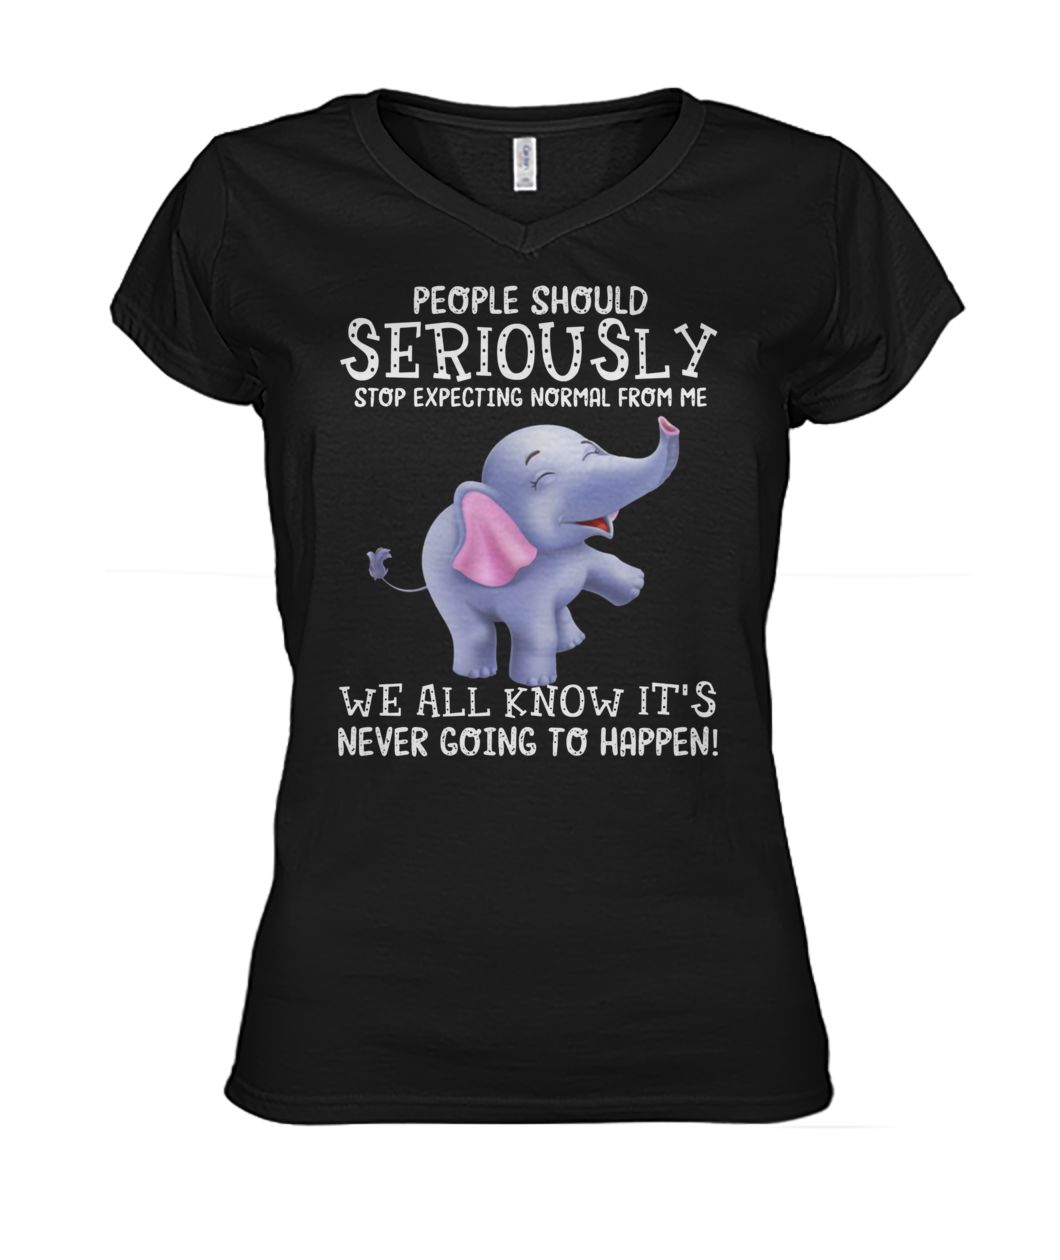 People should seriously stop expecting normal from me baby elephant women's v-neck